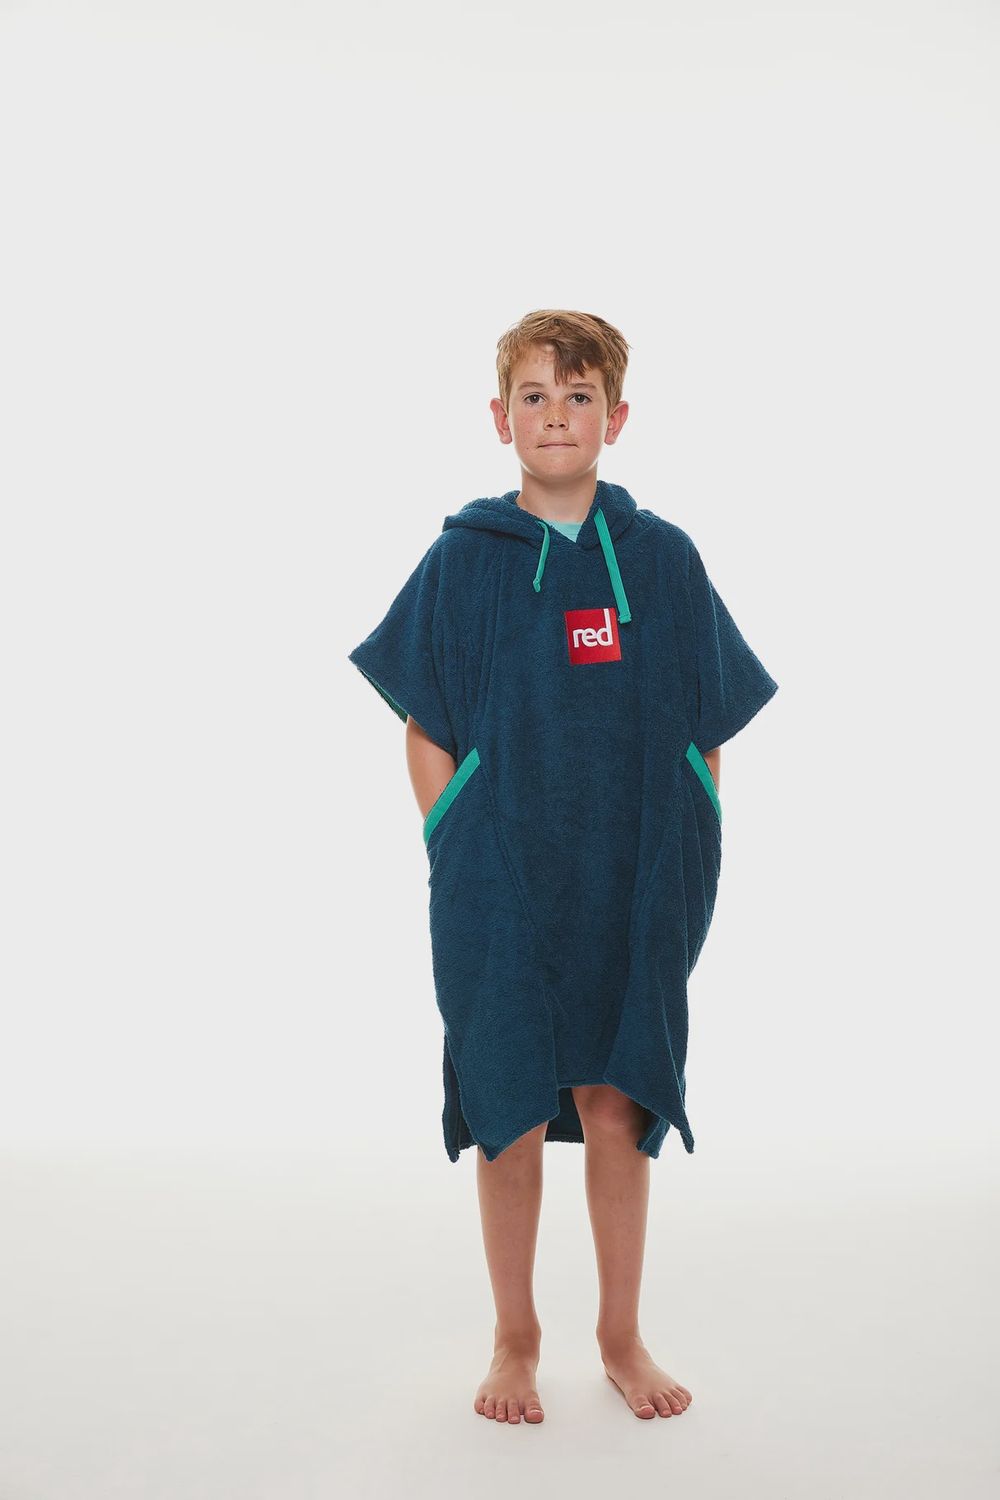 Red Kids Luxury Towelling Changing Robe, Colour: Navy, Size: Kids Small